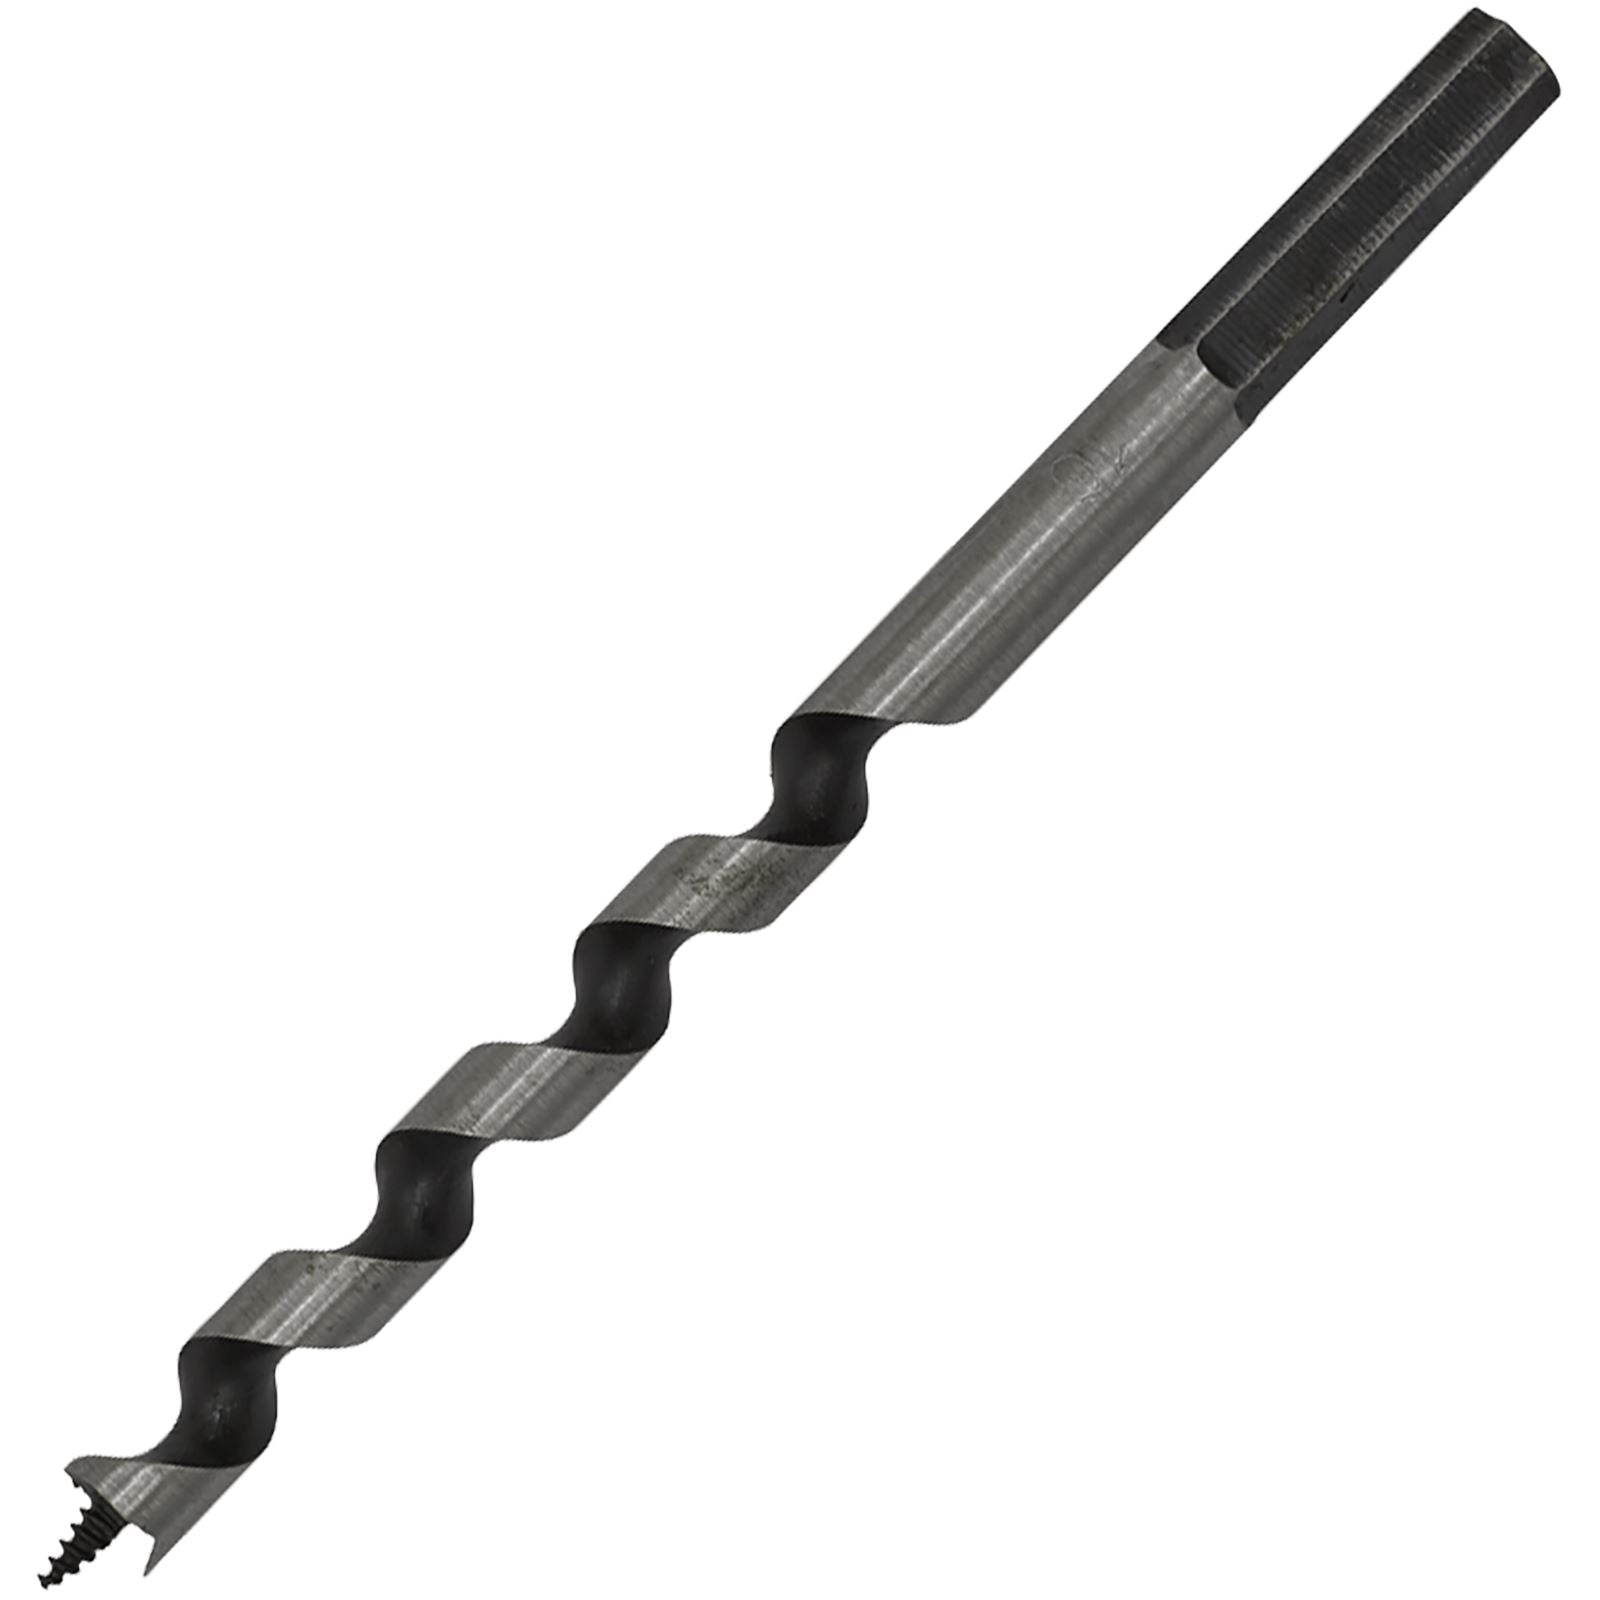 Worksafe by Sealey Auger Wood Drill Bit 10mm x 155mm